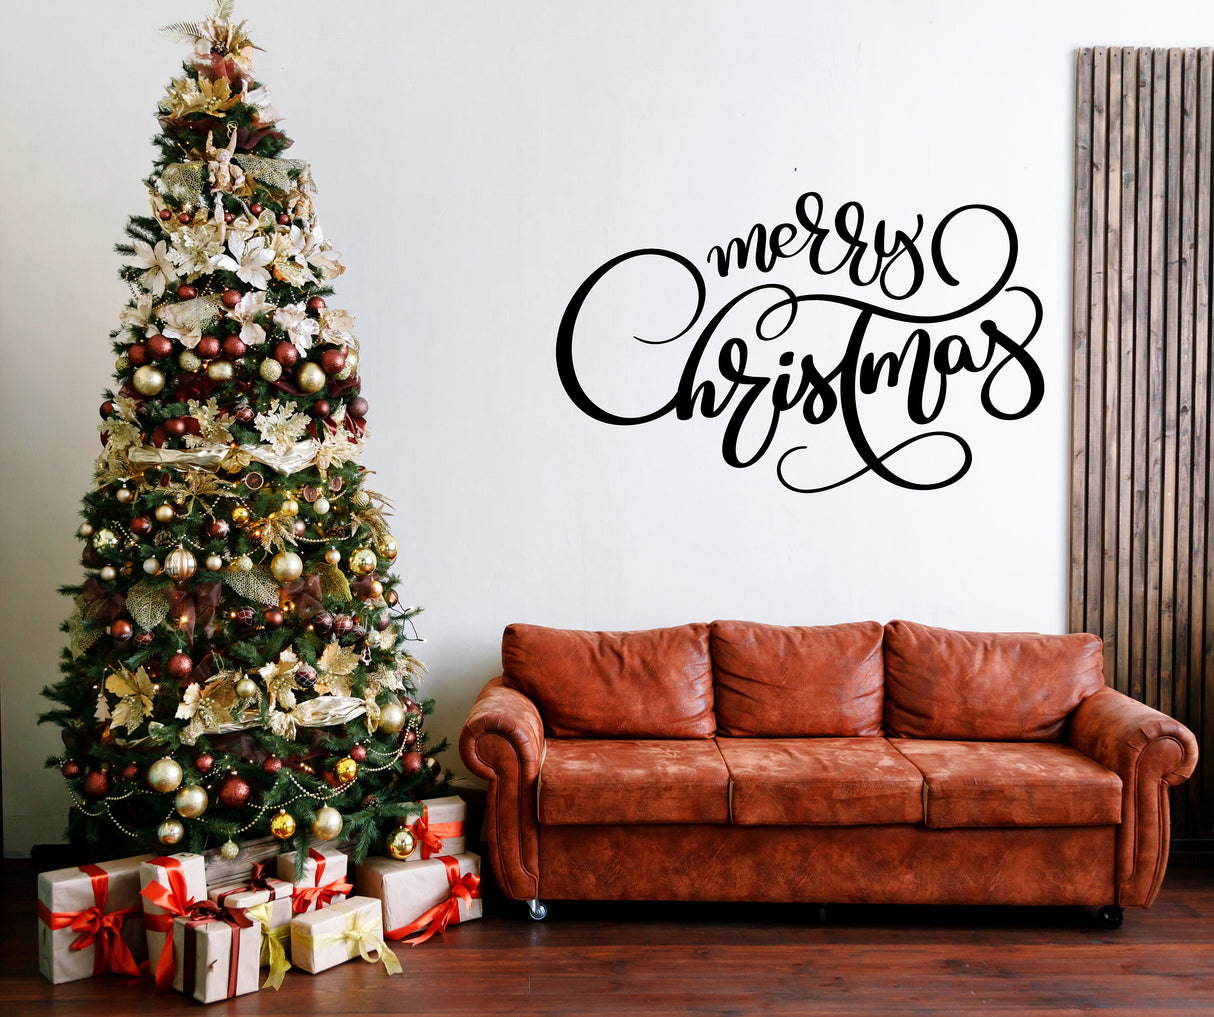 Elegant Christmas Quote Wall Vinyl Sticker - "Merry Christmas" Family Decal Sign - Beautiful Cursive Text Living Room Decor Holiday Sayings